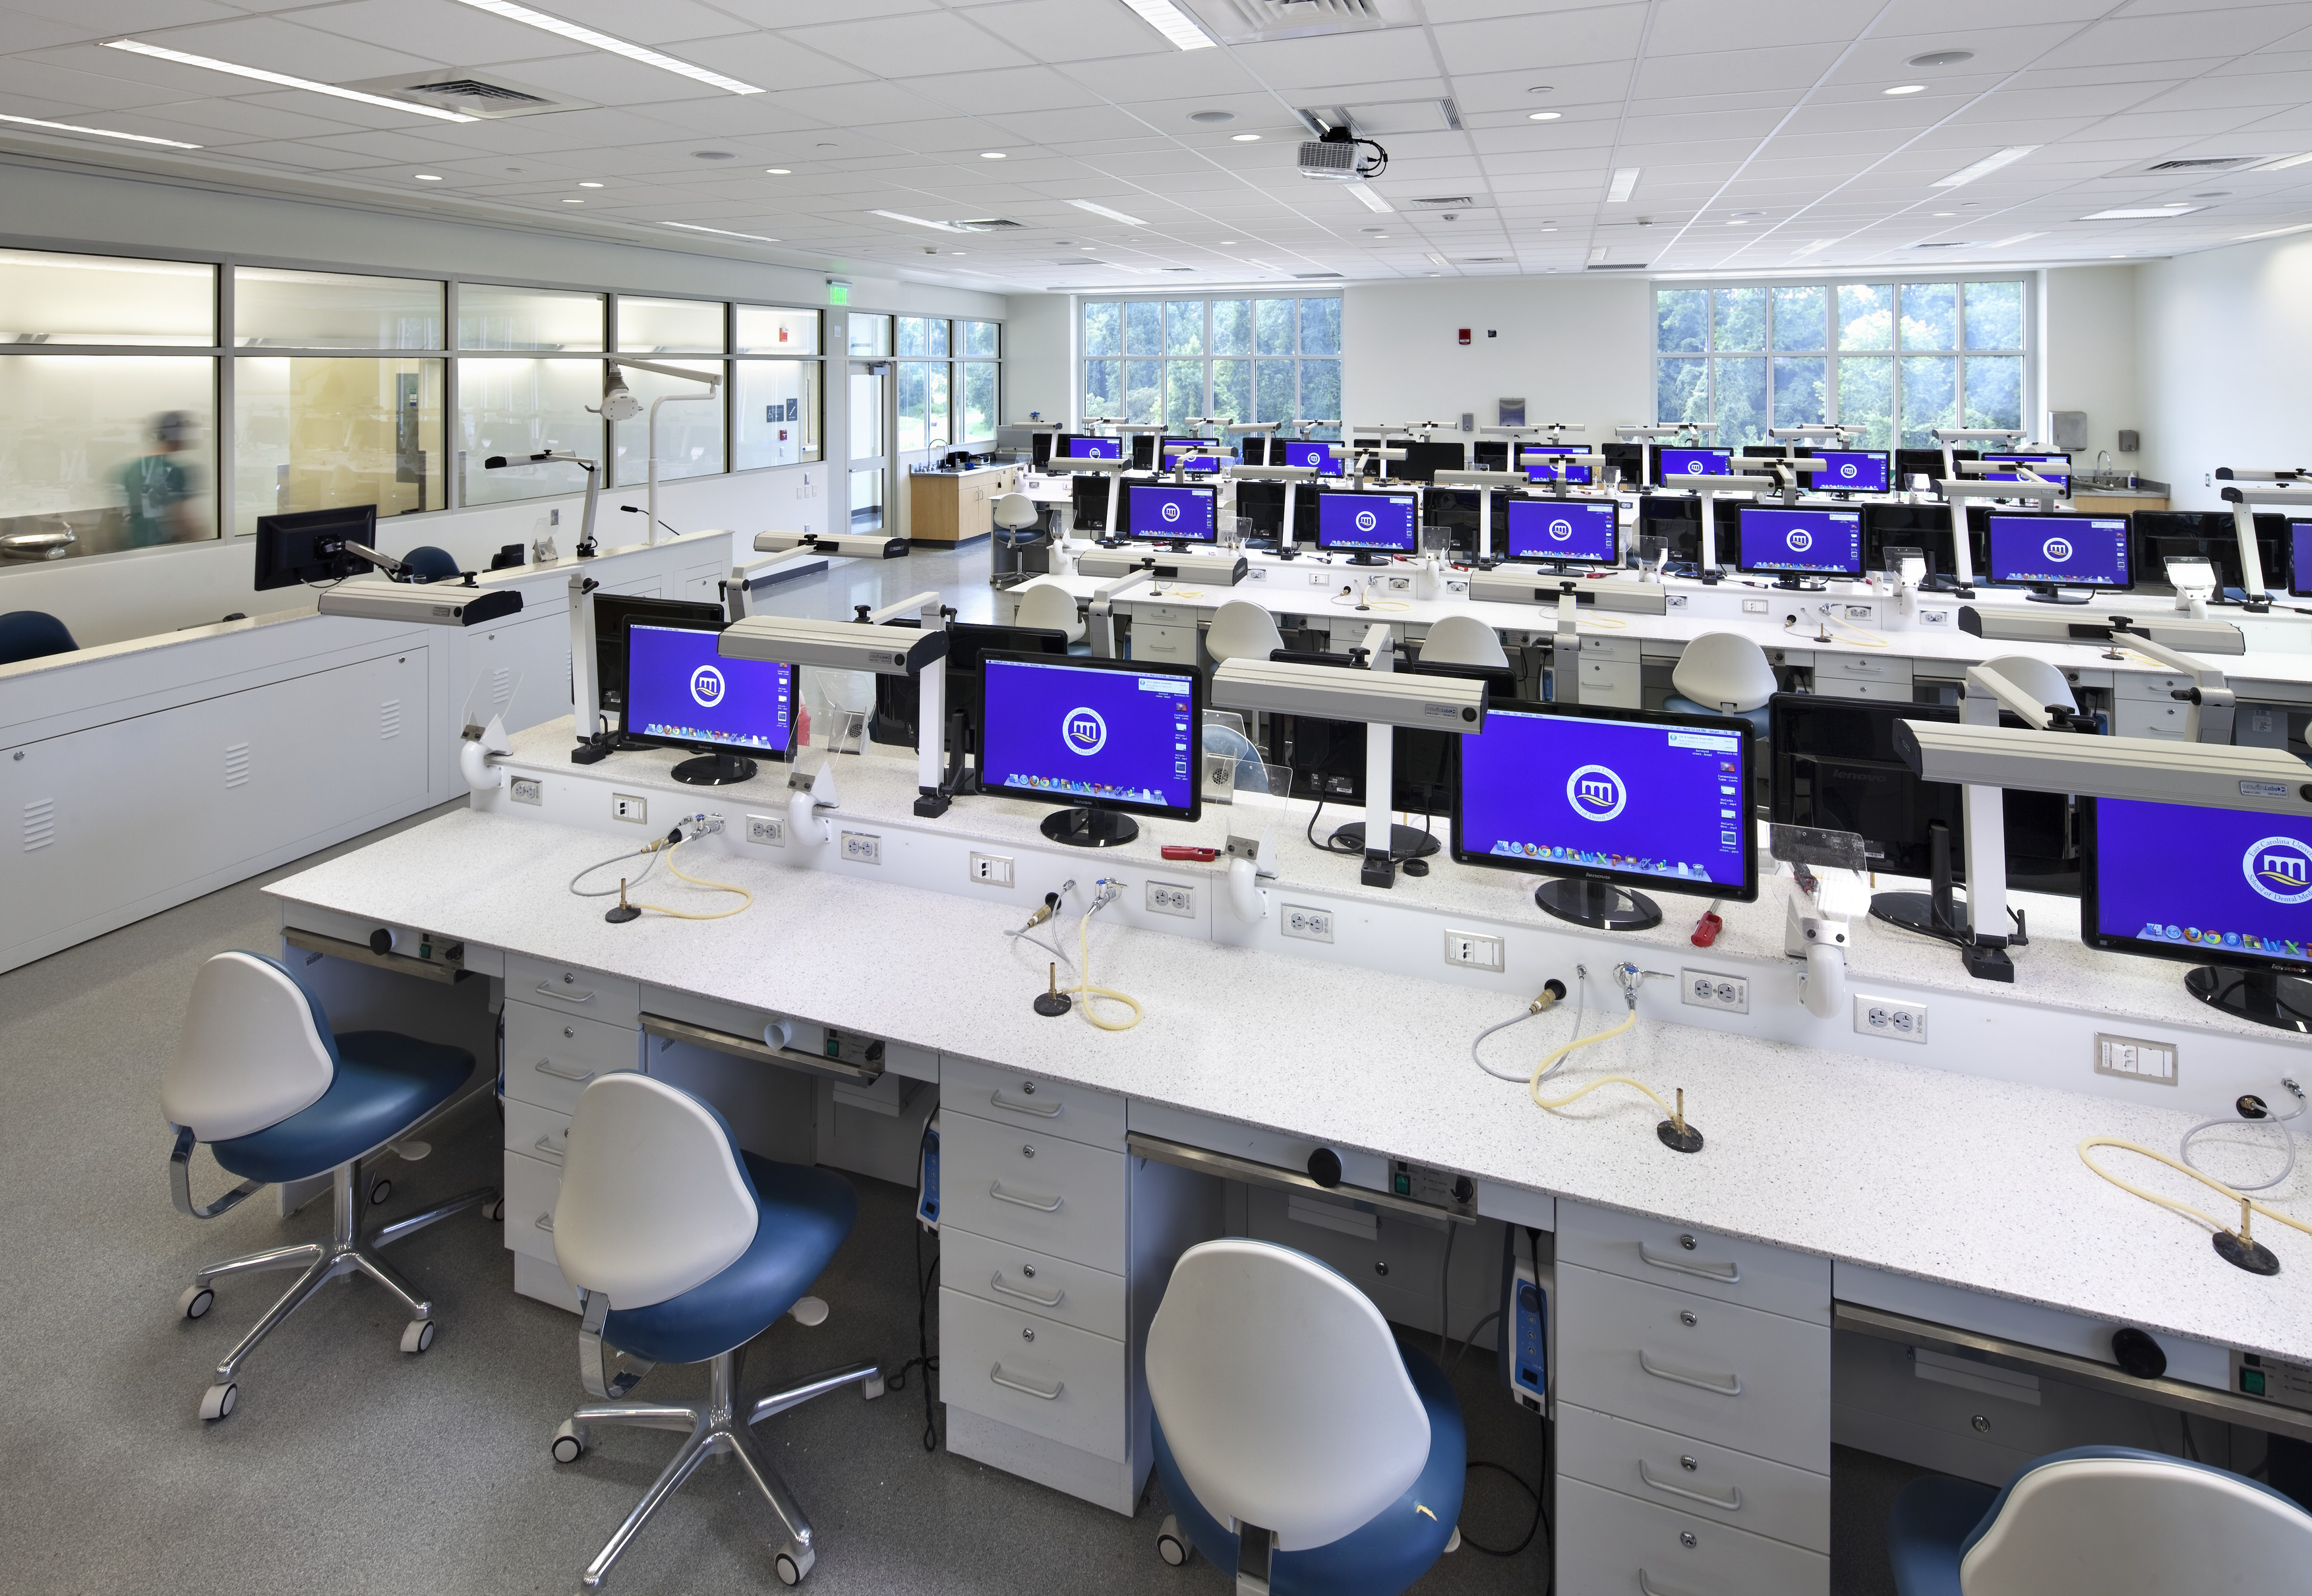 Multiple dedicated training stations ensure students easy and ready access.